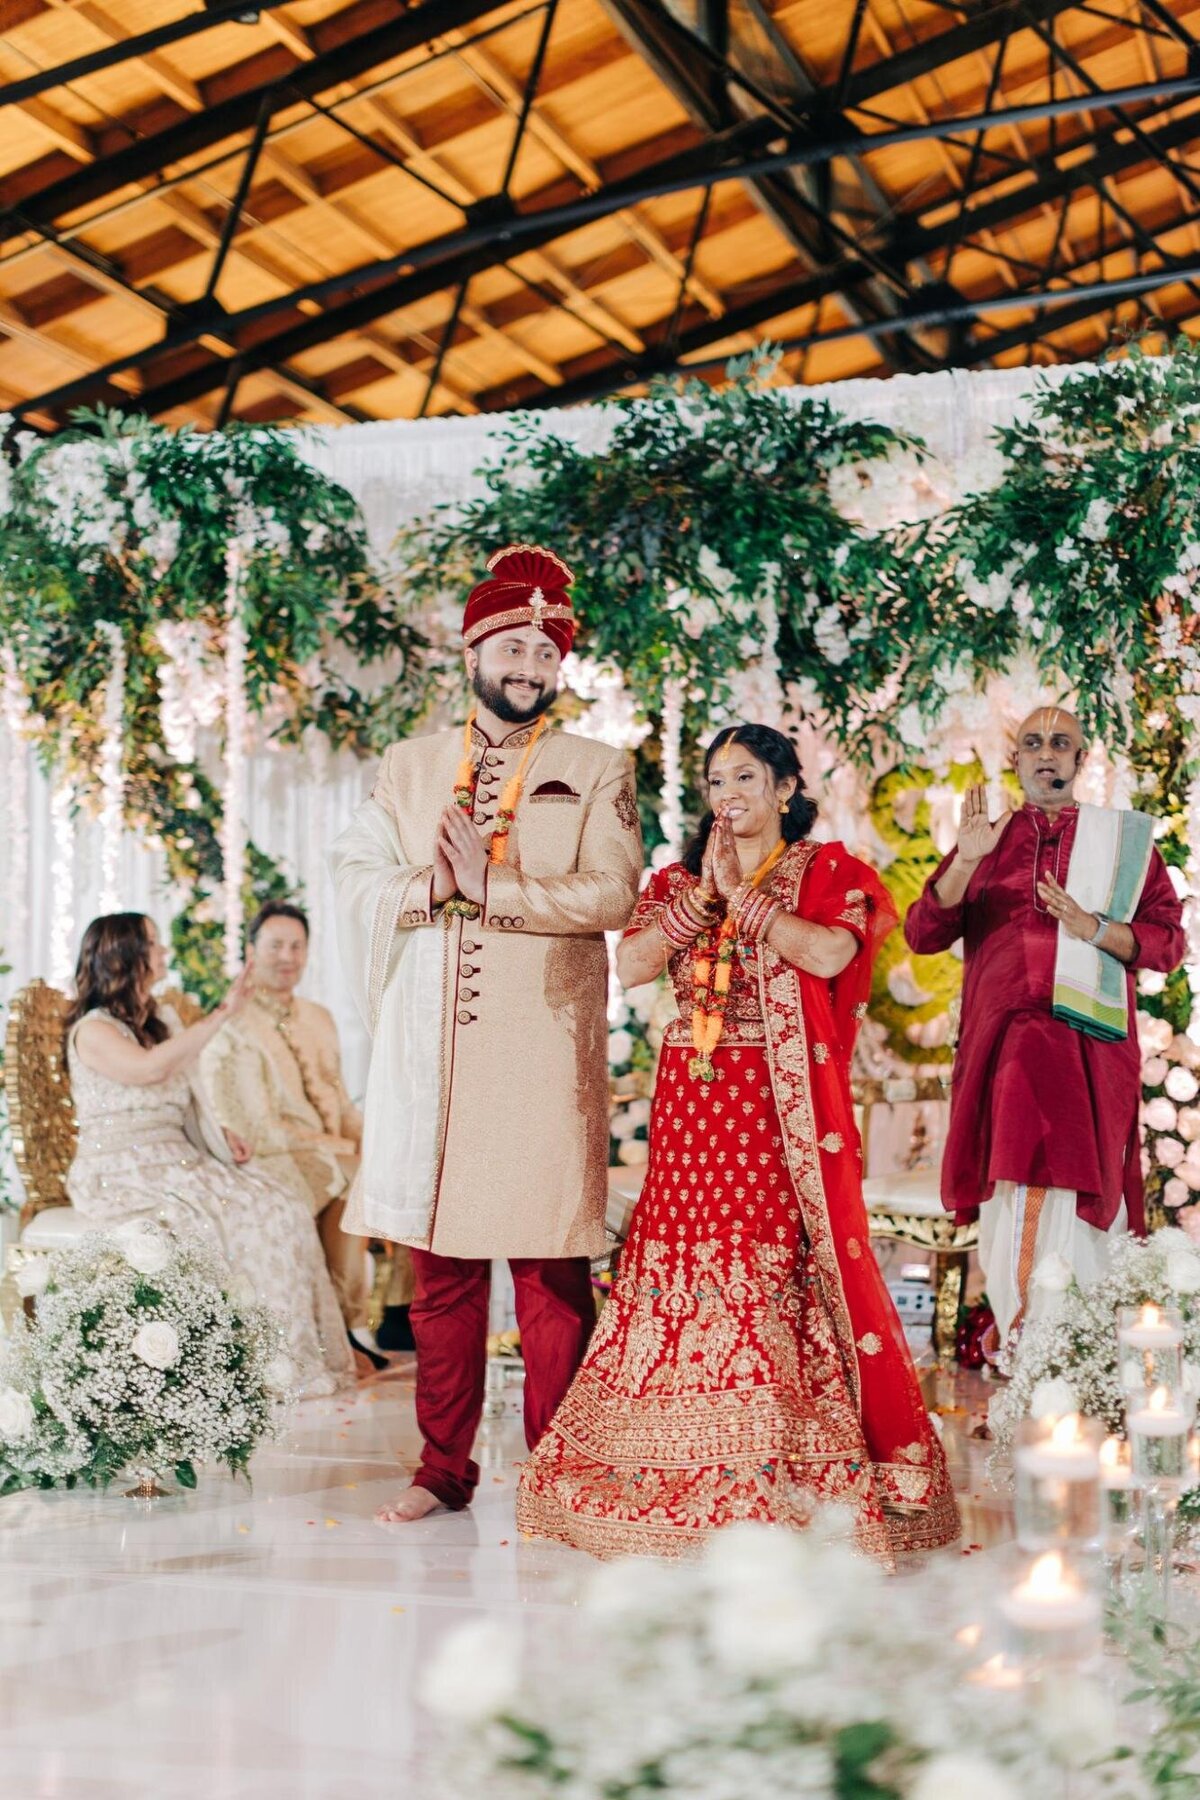 A bride and groom in traditional indian wedding attire participating in a ceremony surrounded by floral decorations and guests.